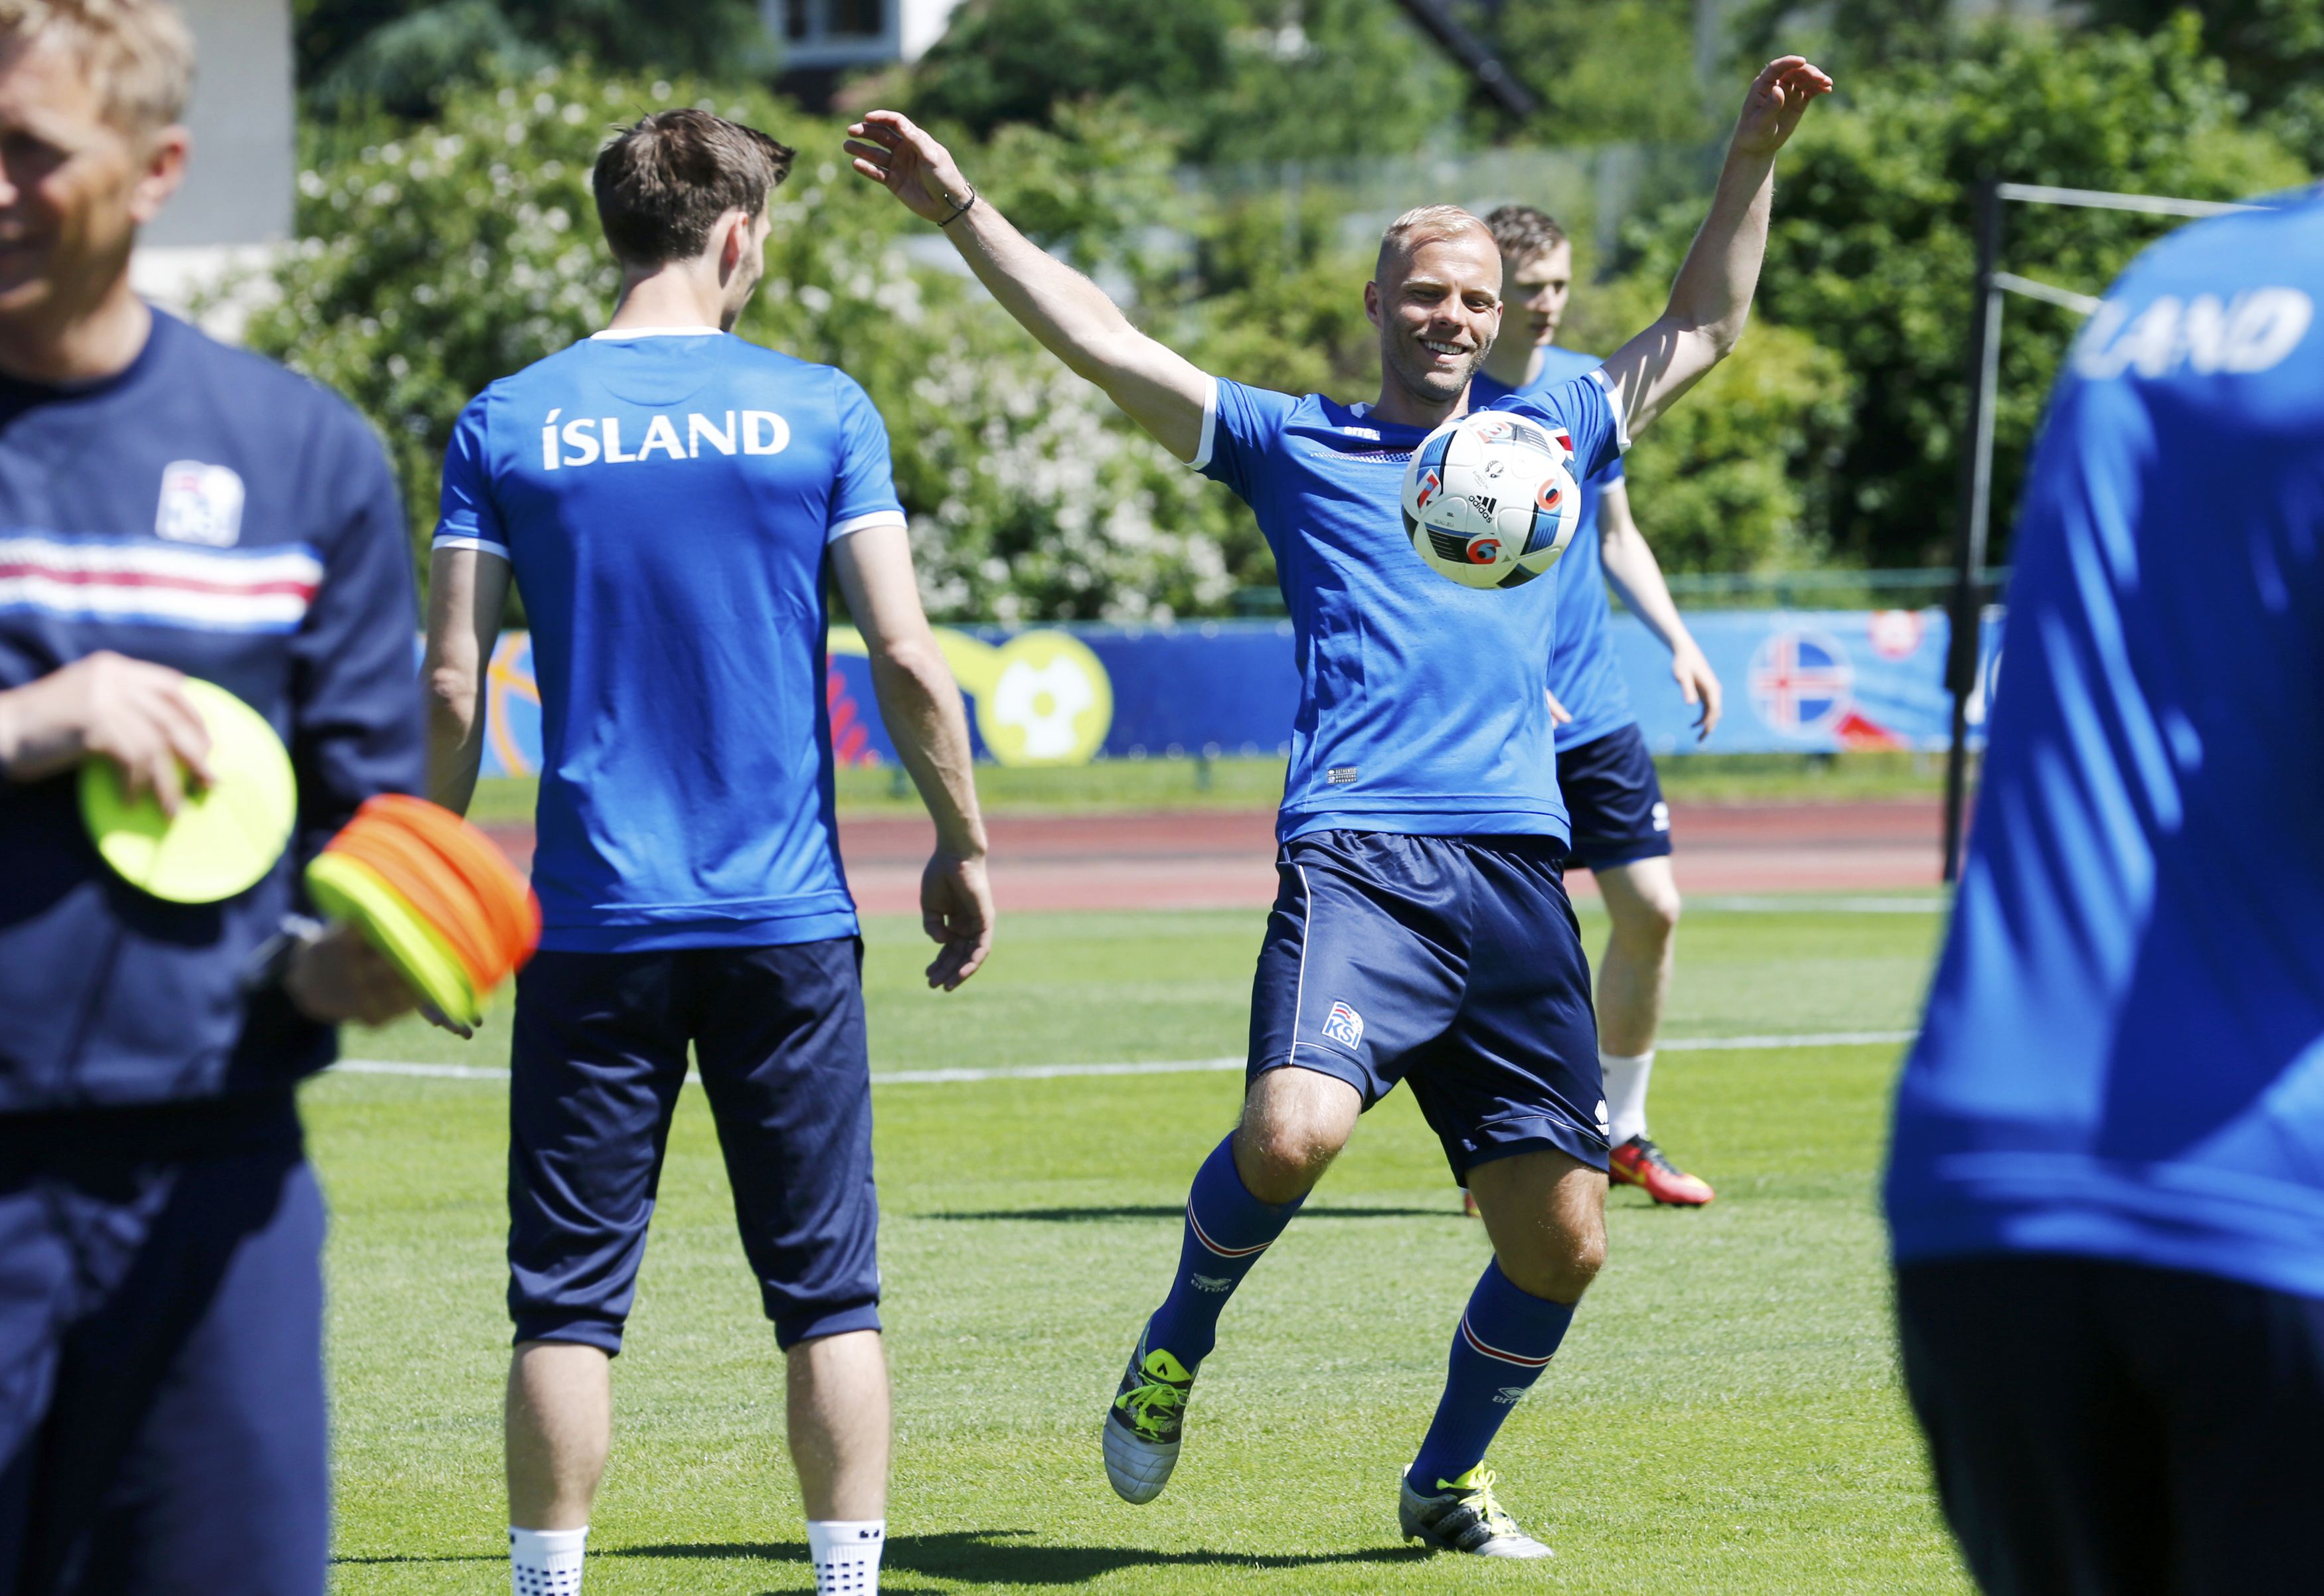 Football Soccer - Euro 2016 - Iceland Training - Complexe Sportif d'Albigny, Annecy-le-Vieux, France 10/6/16 - Iceland's Eidur Gudjohnsen during training REUTERS/Denis Balibouse